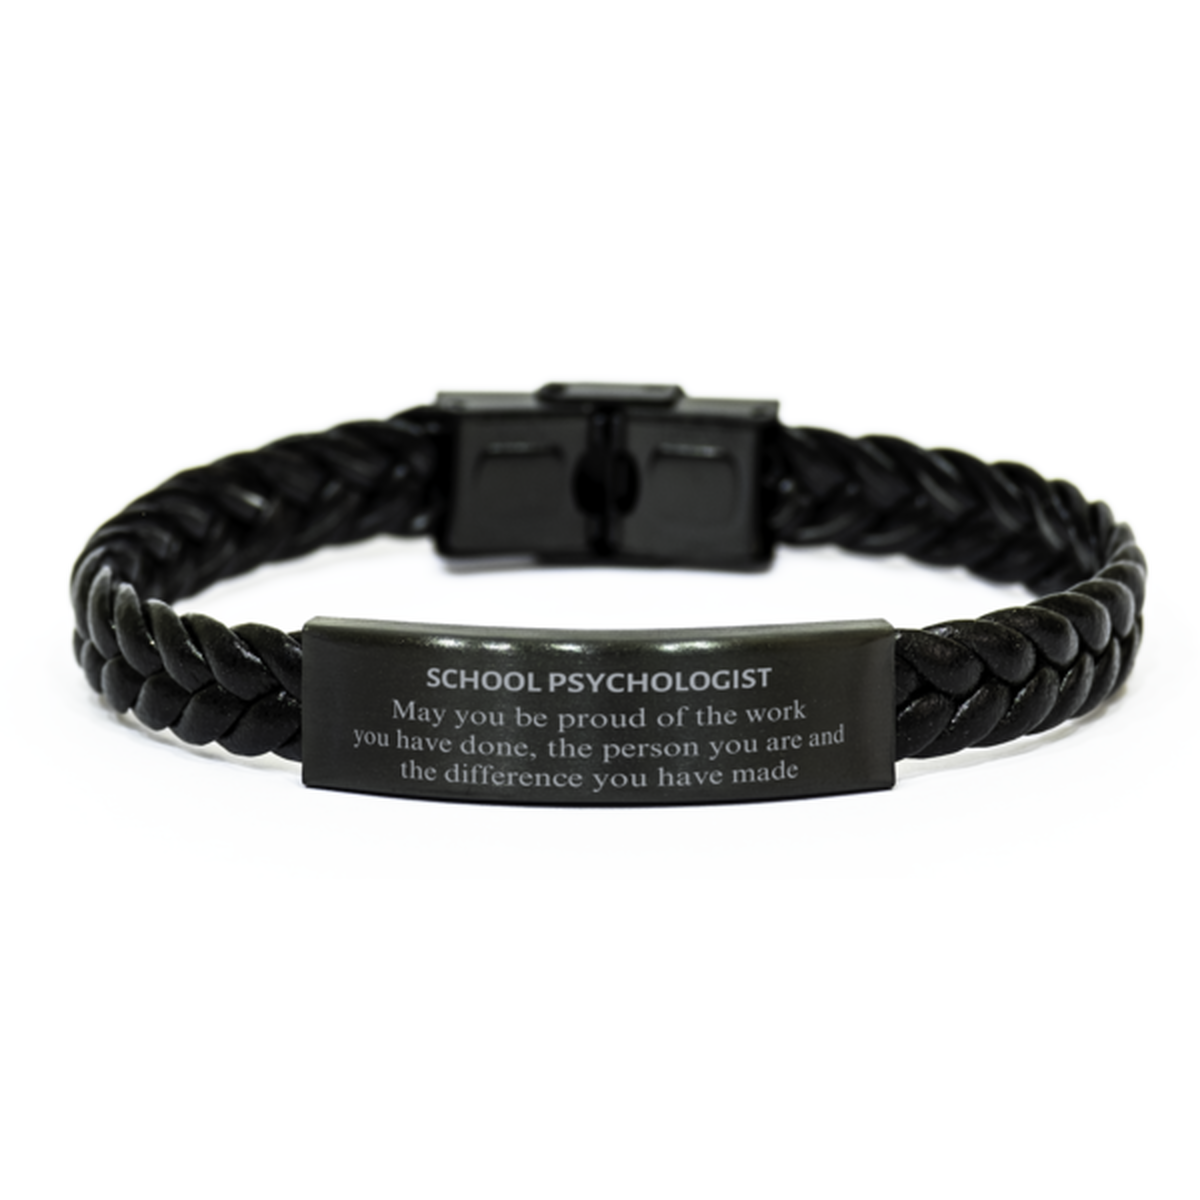 School Psychologist May you be proud of the work you have done, Retirement School Psychologist Braided Leather Bracelet for Colleague Appreciation Gifts Amazing for School Psychologist